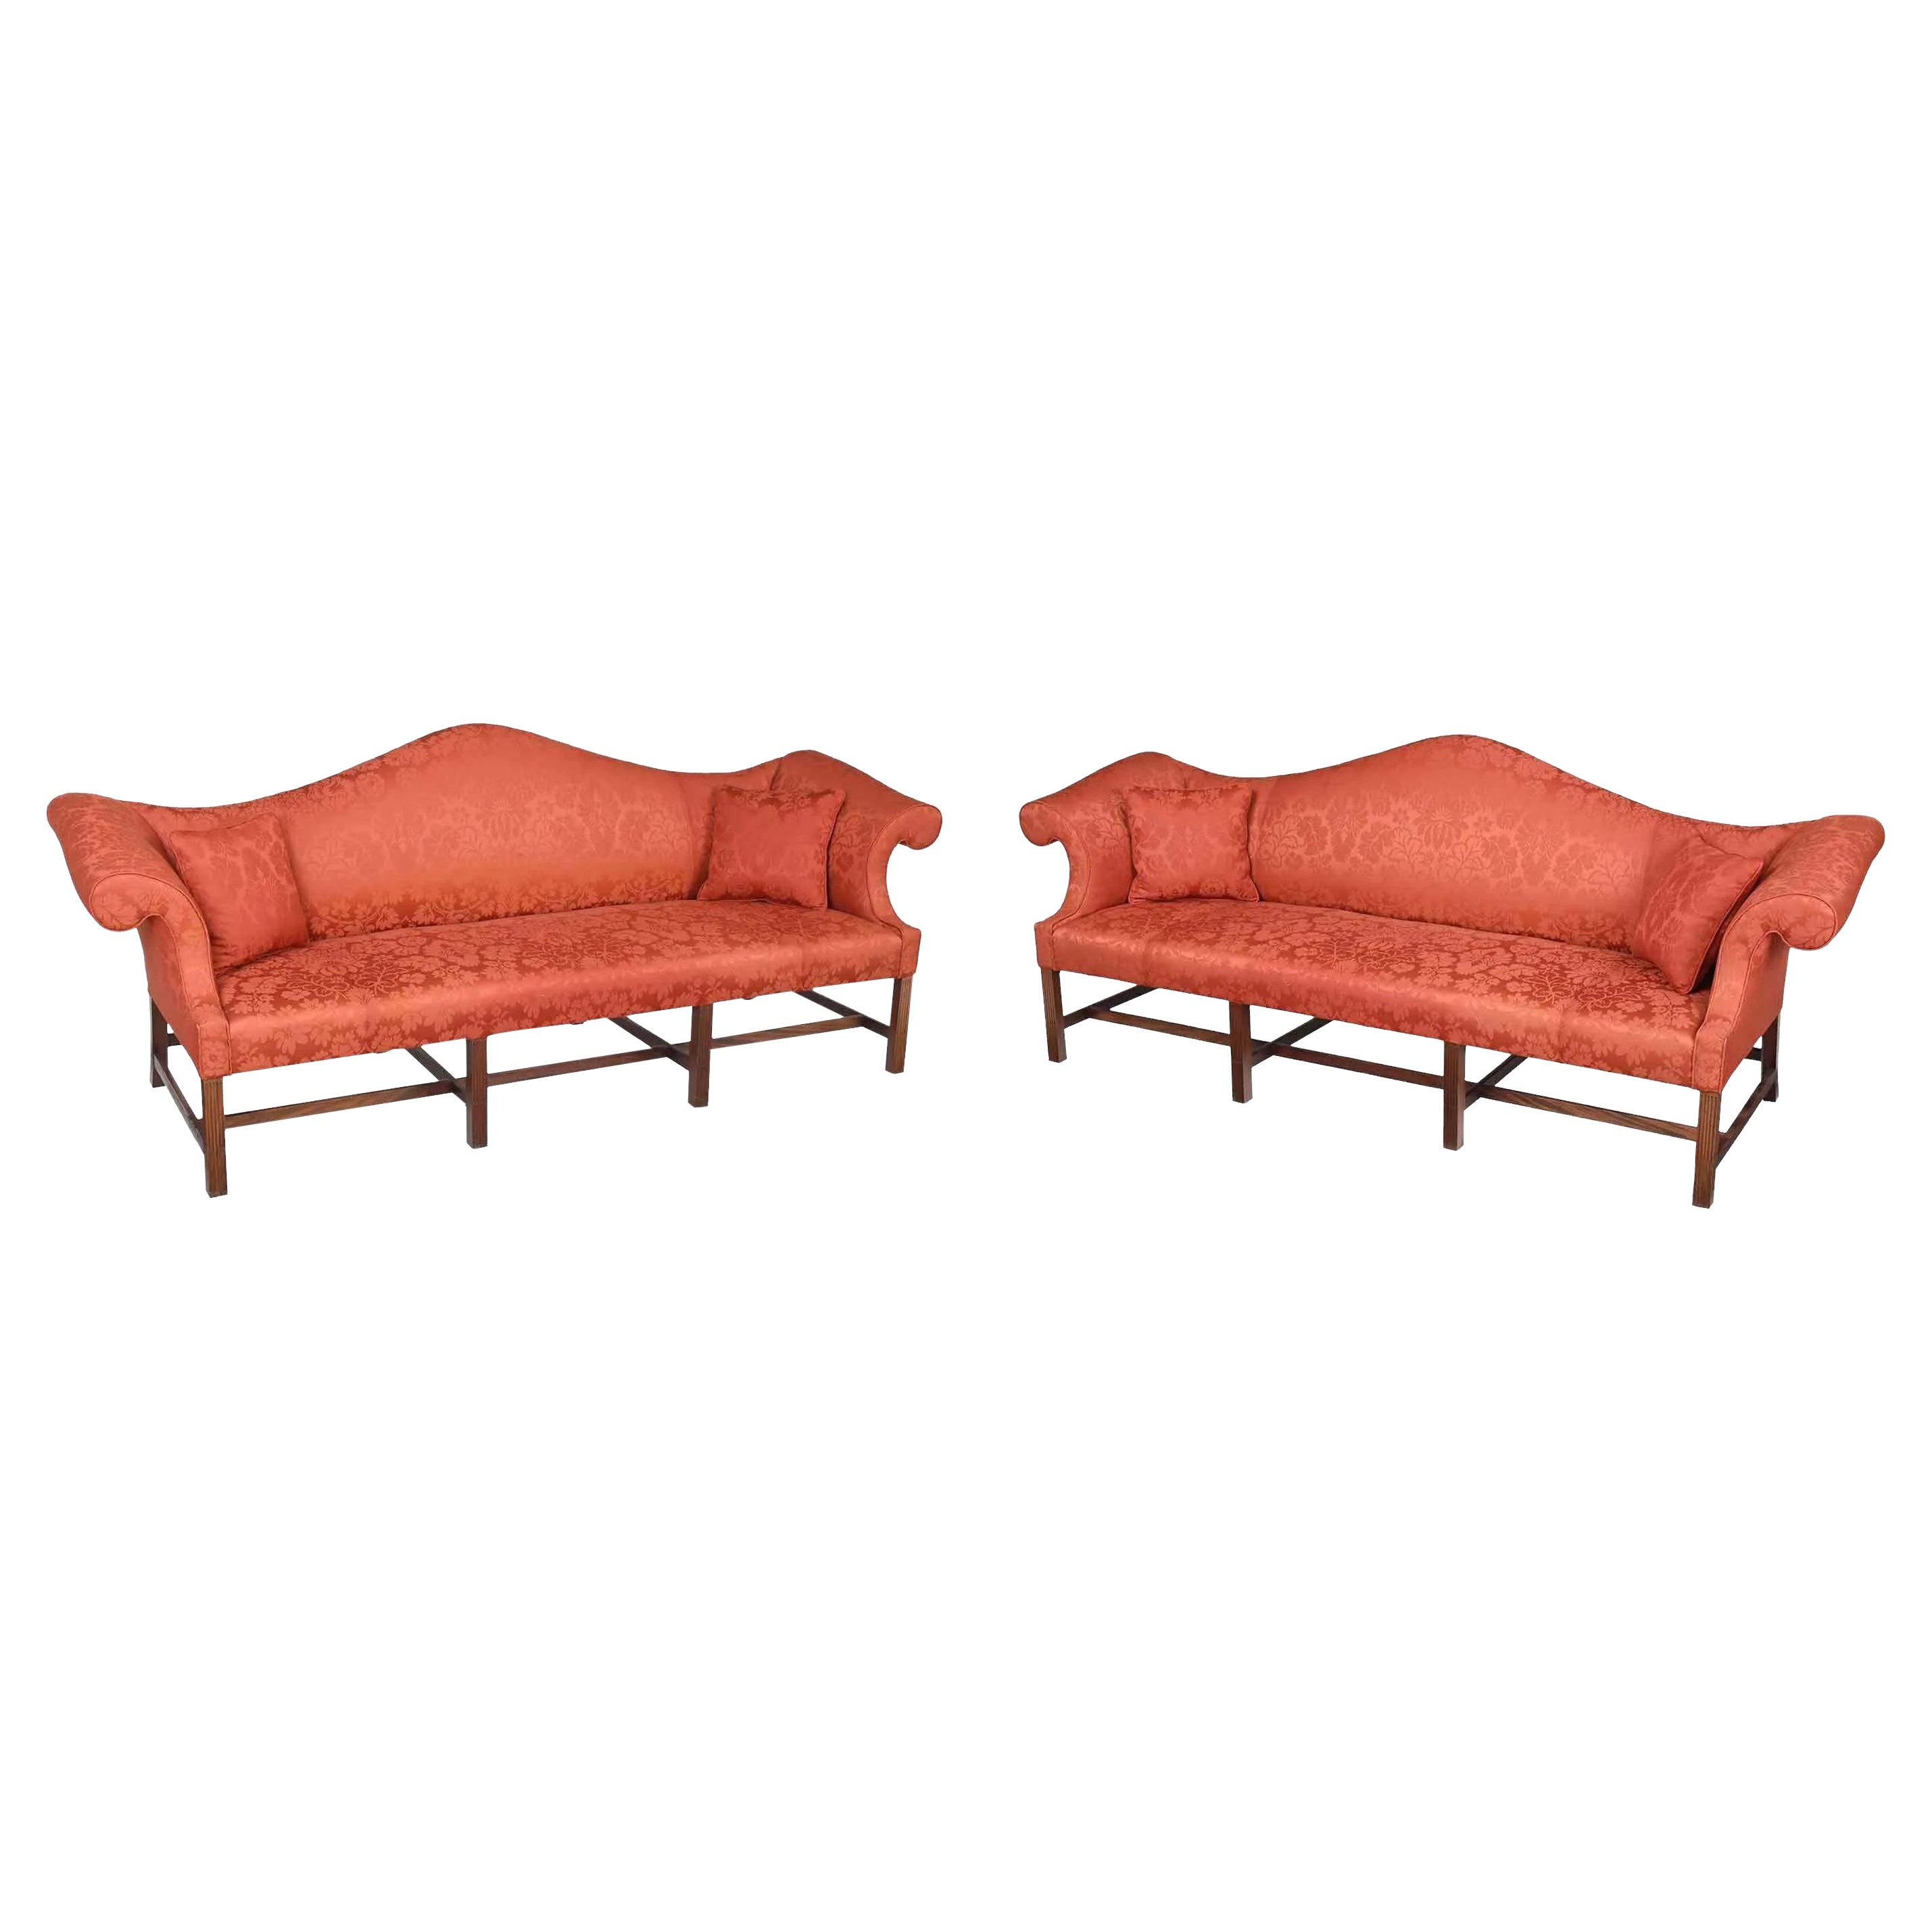 Pair of American 18th Century Style Custom Chippendale Mahogany Sofas For Sale